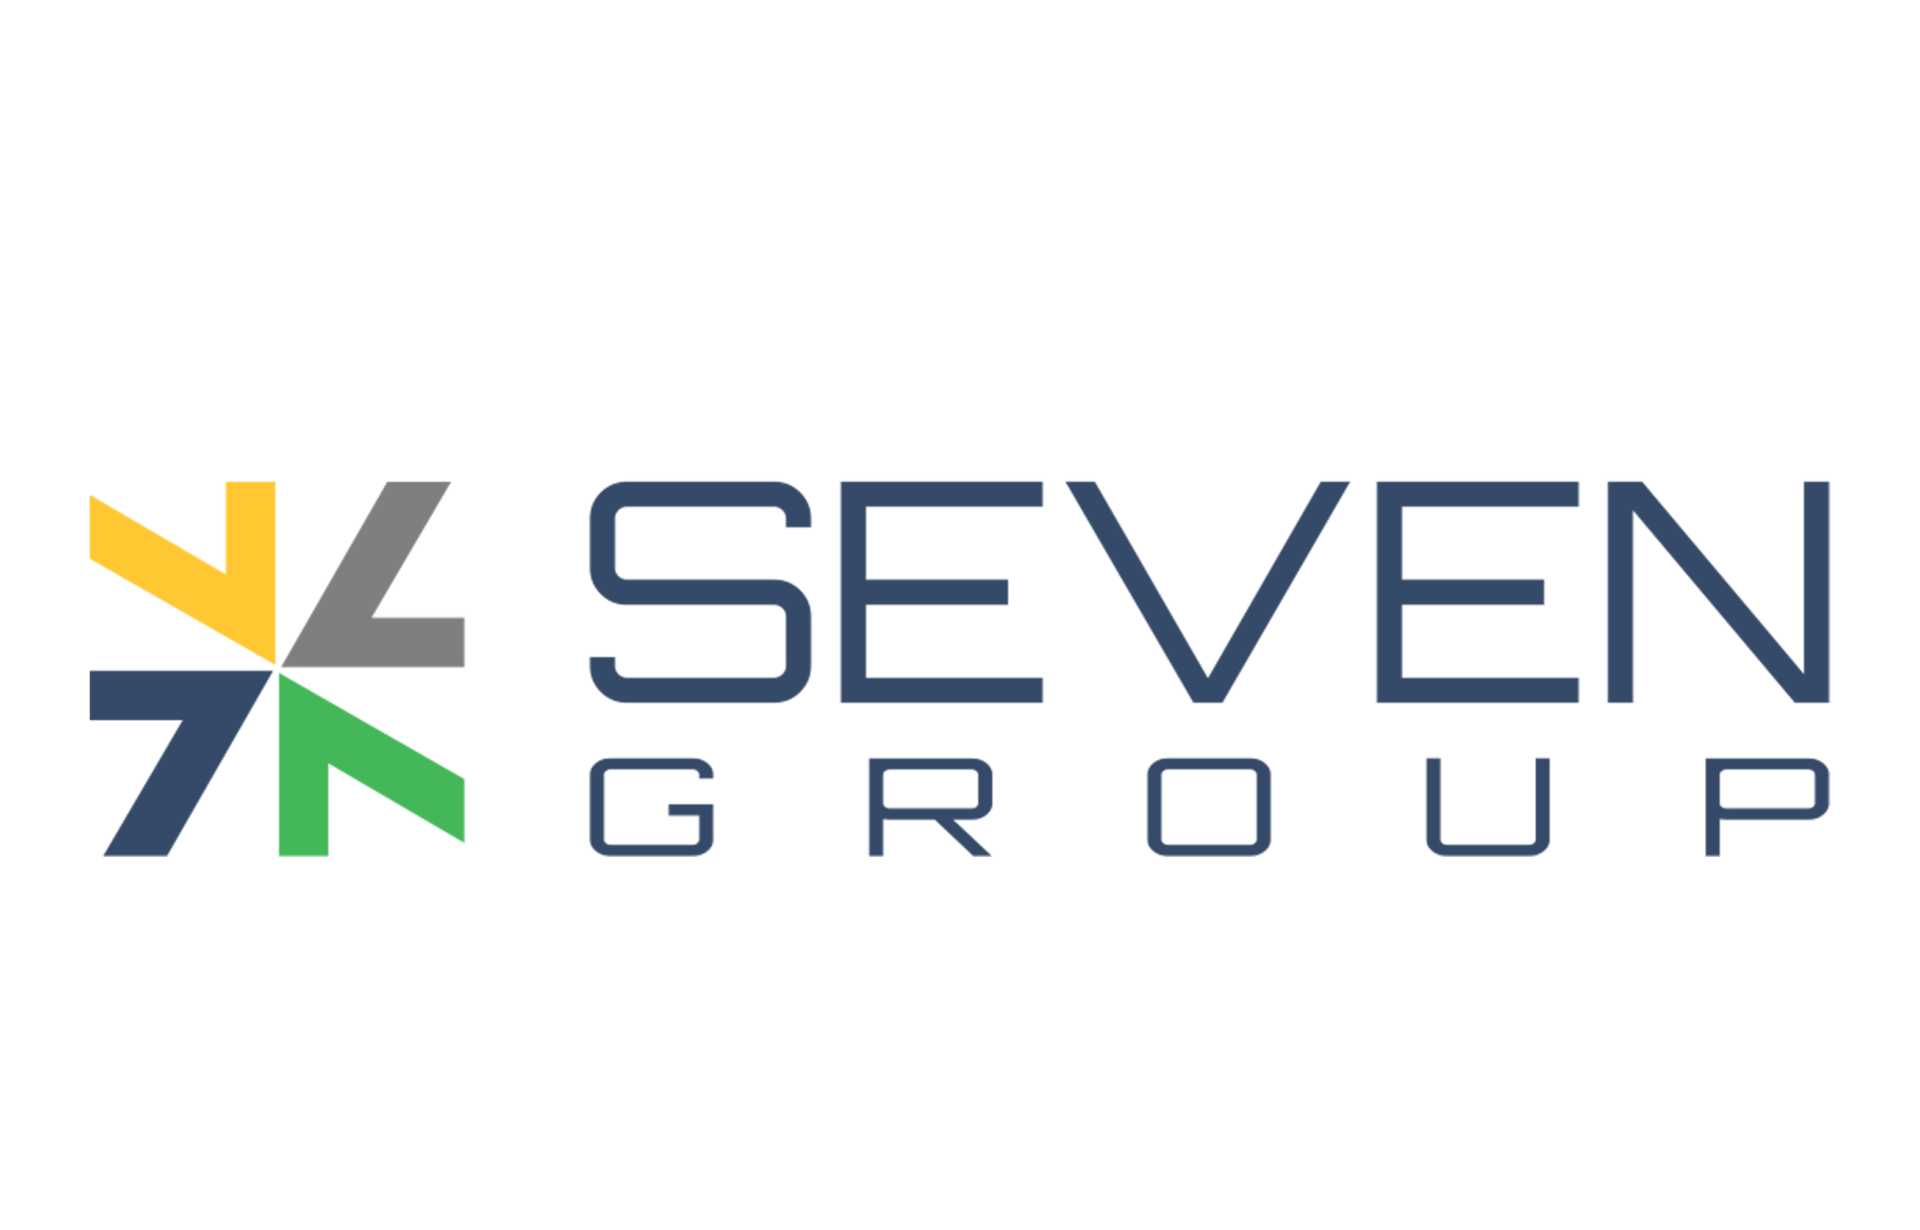 SEVEN Group